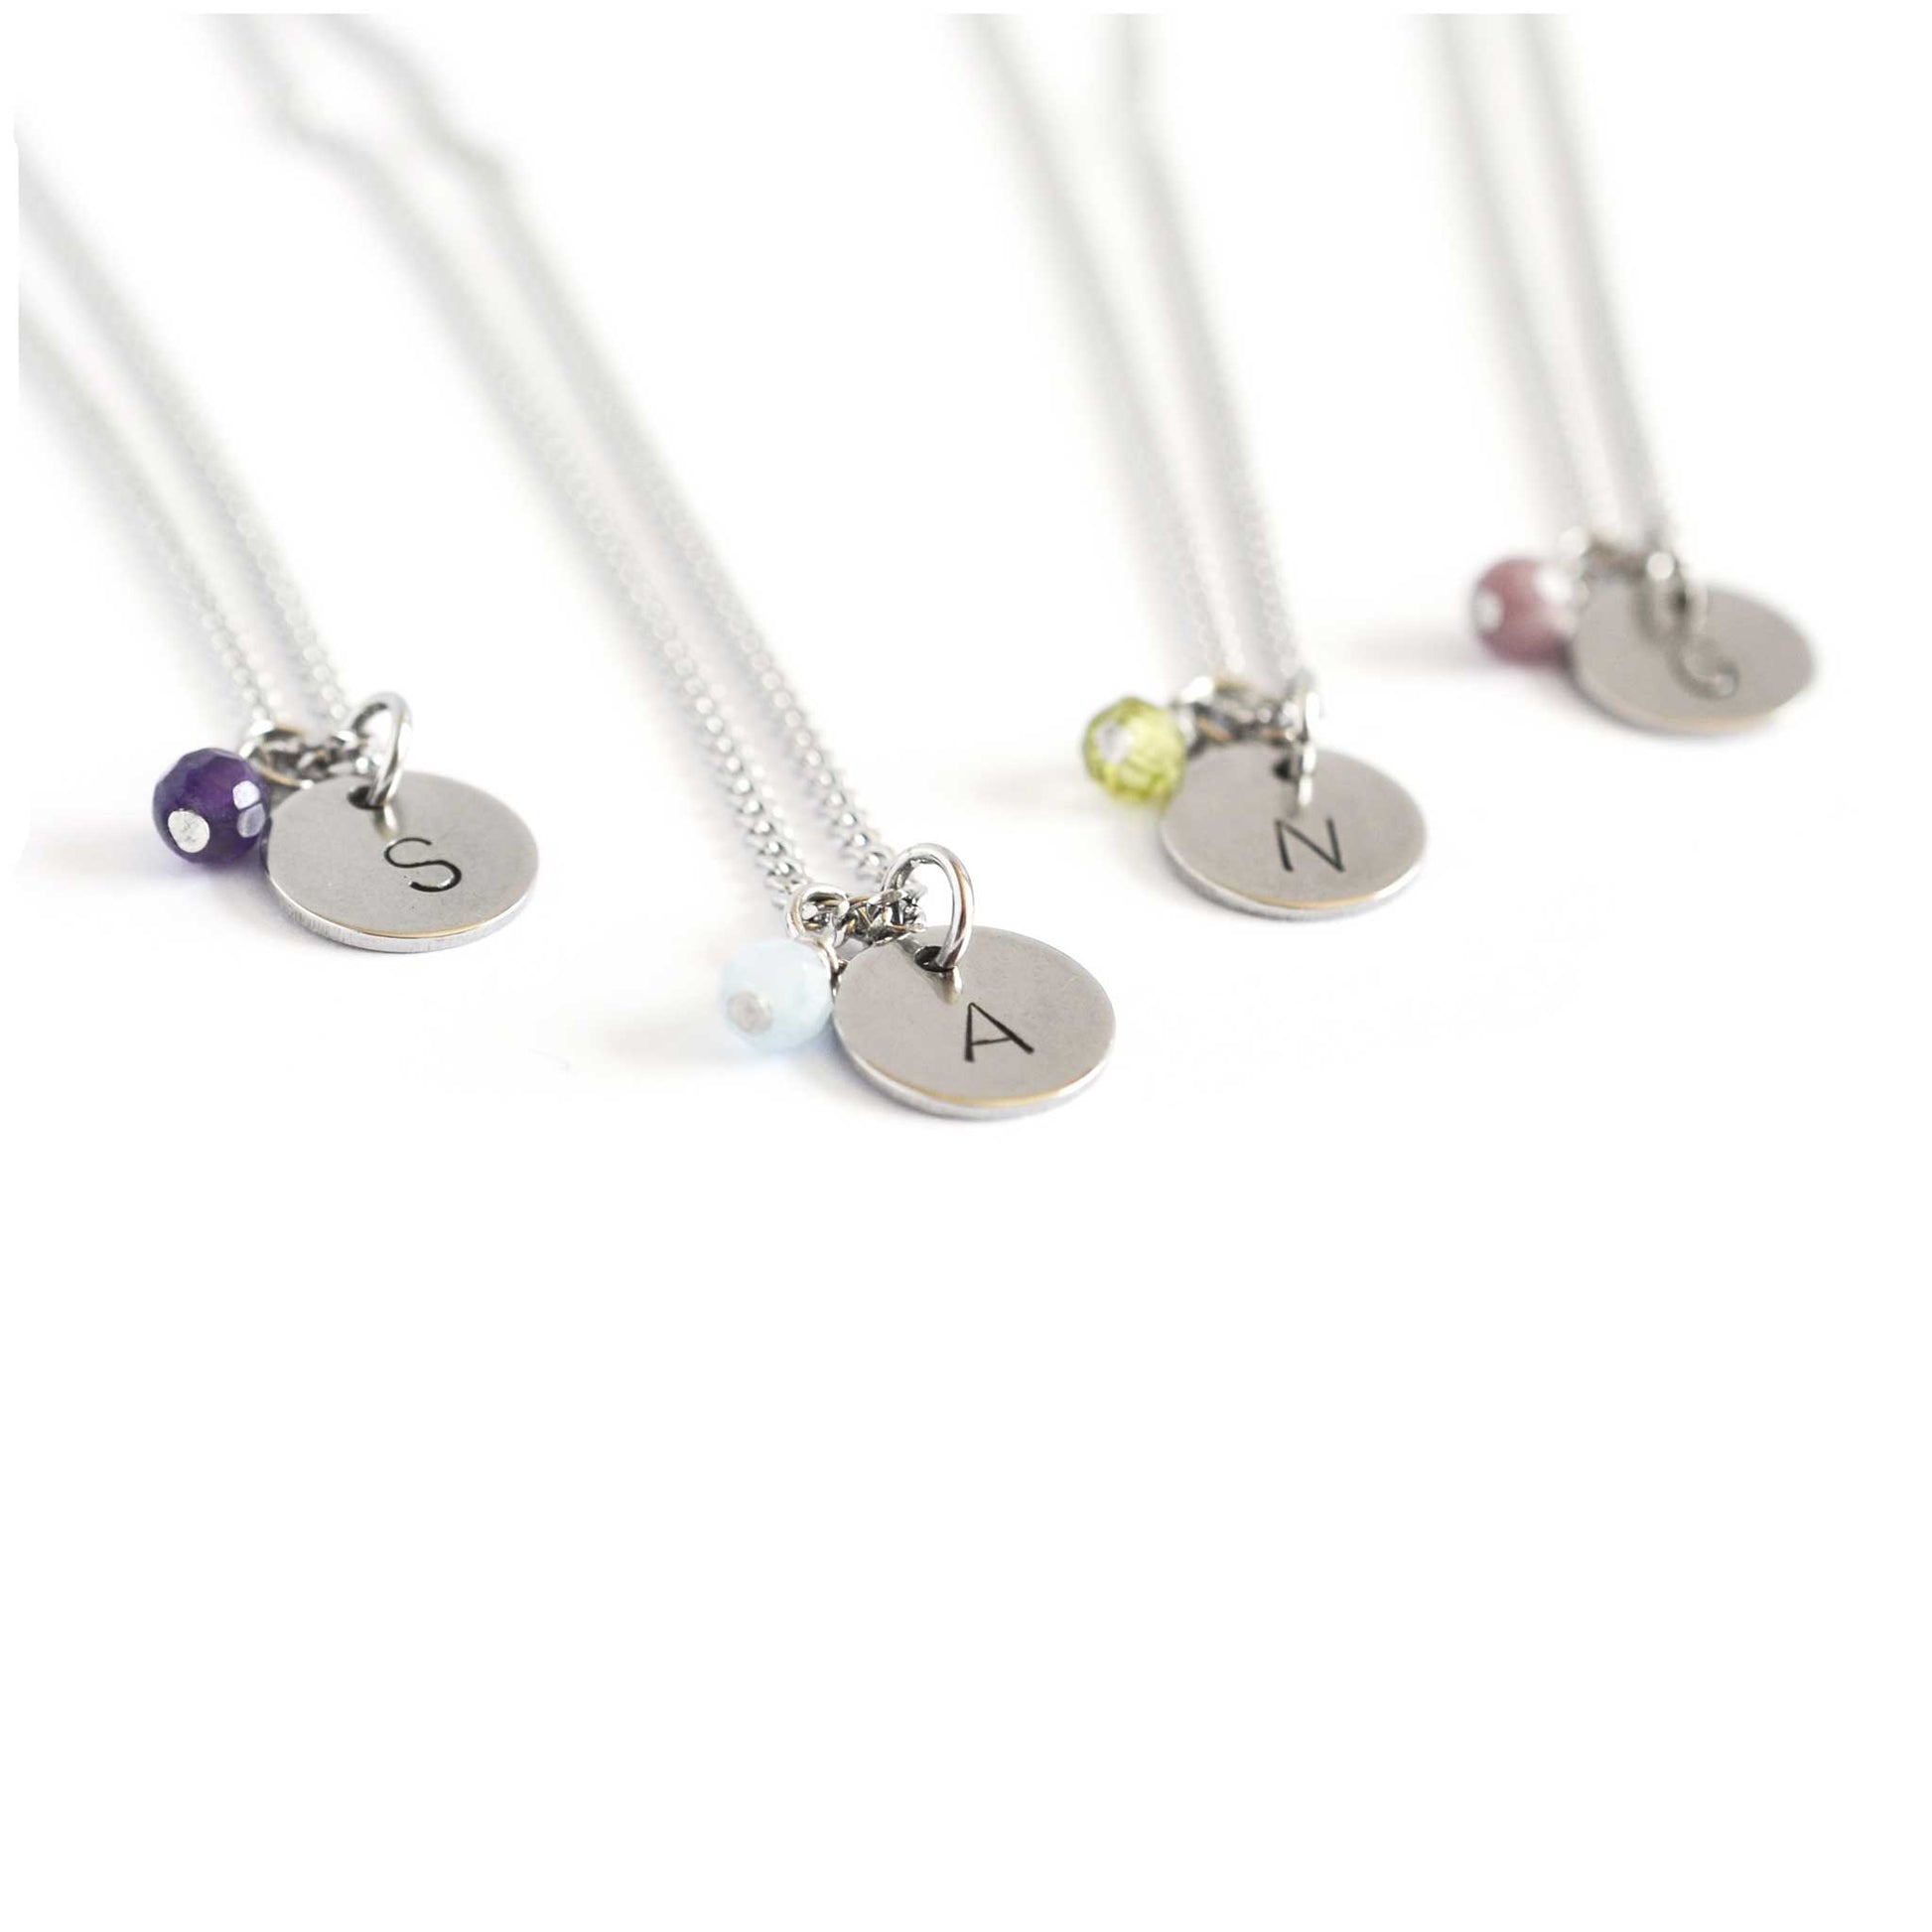 Detail view of birthstone necklaces with hand stamped initials